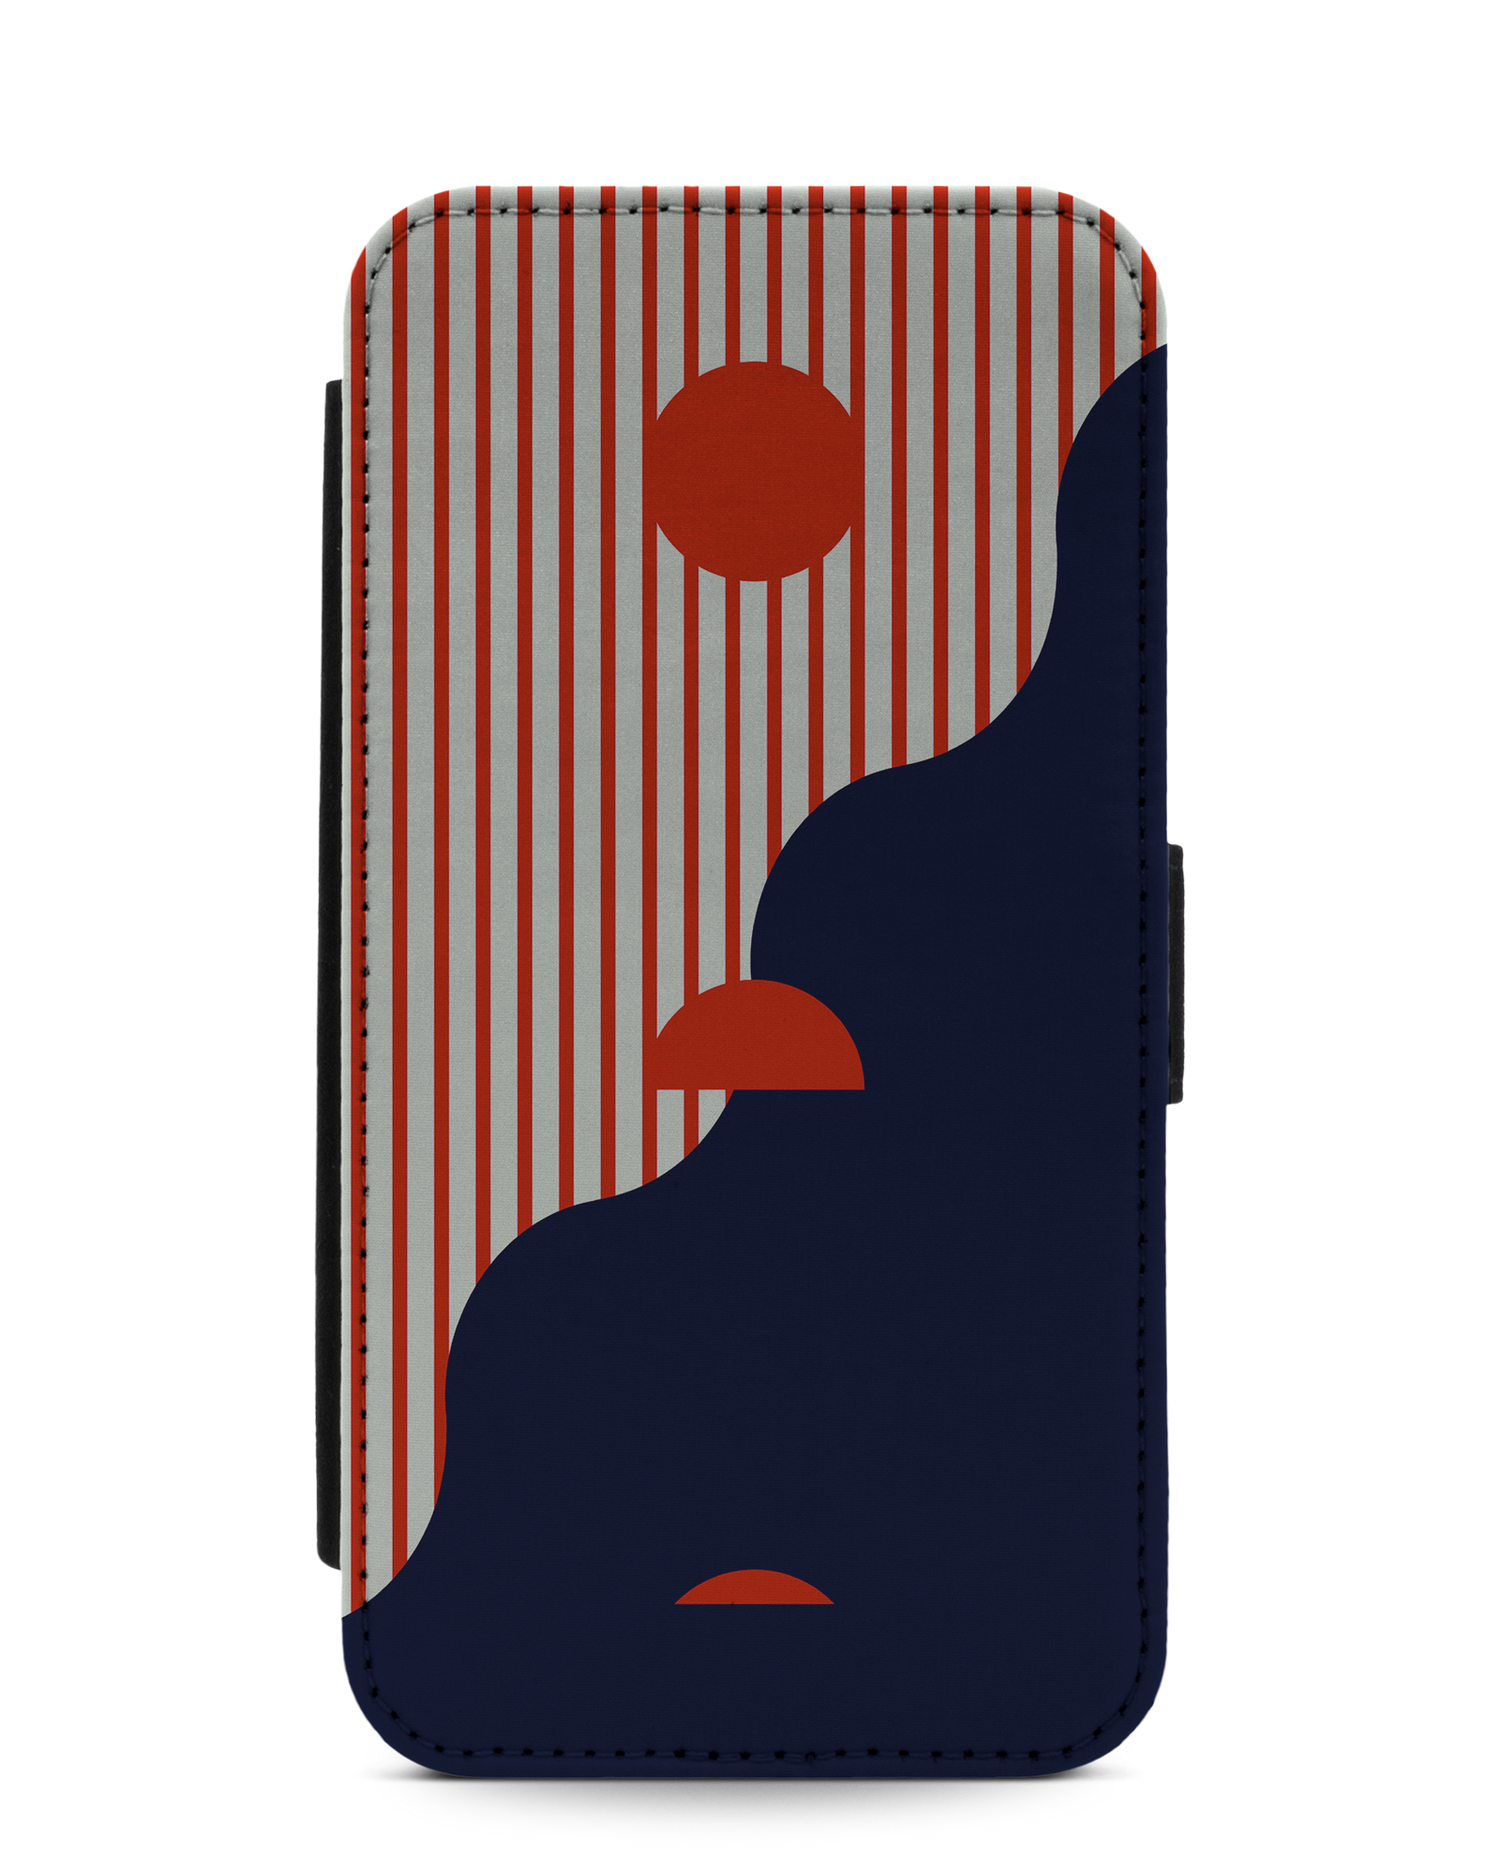 Metric Sunset Wallet Phone Case Apple iPhone 11 Pro Max: Front View